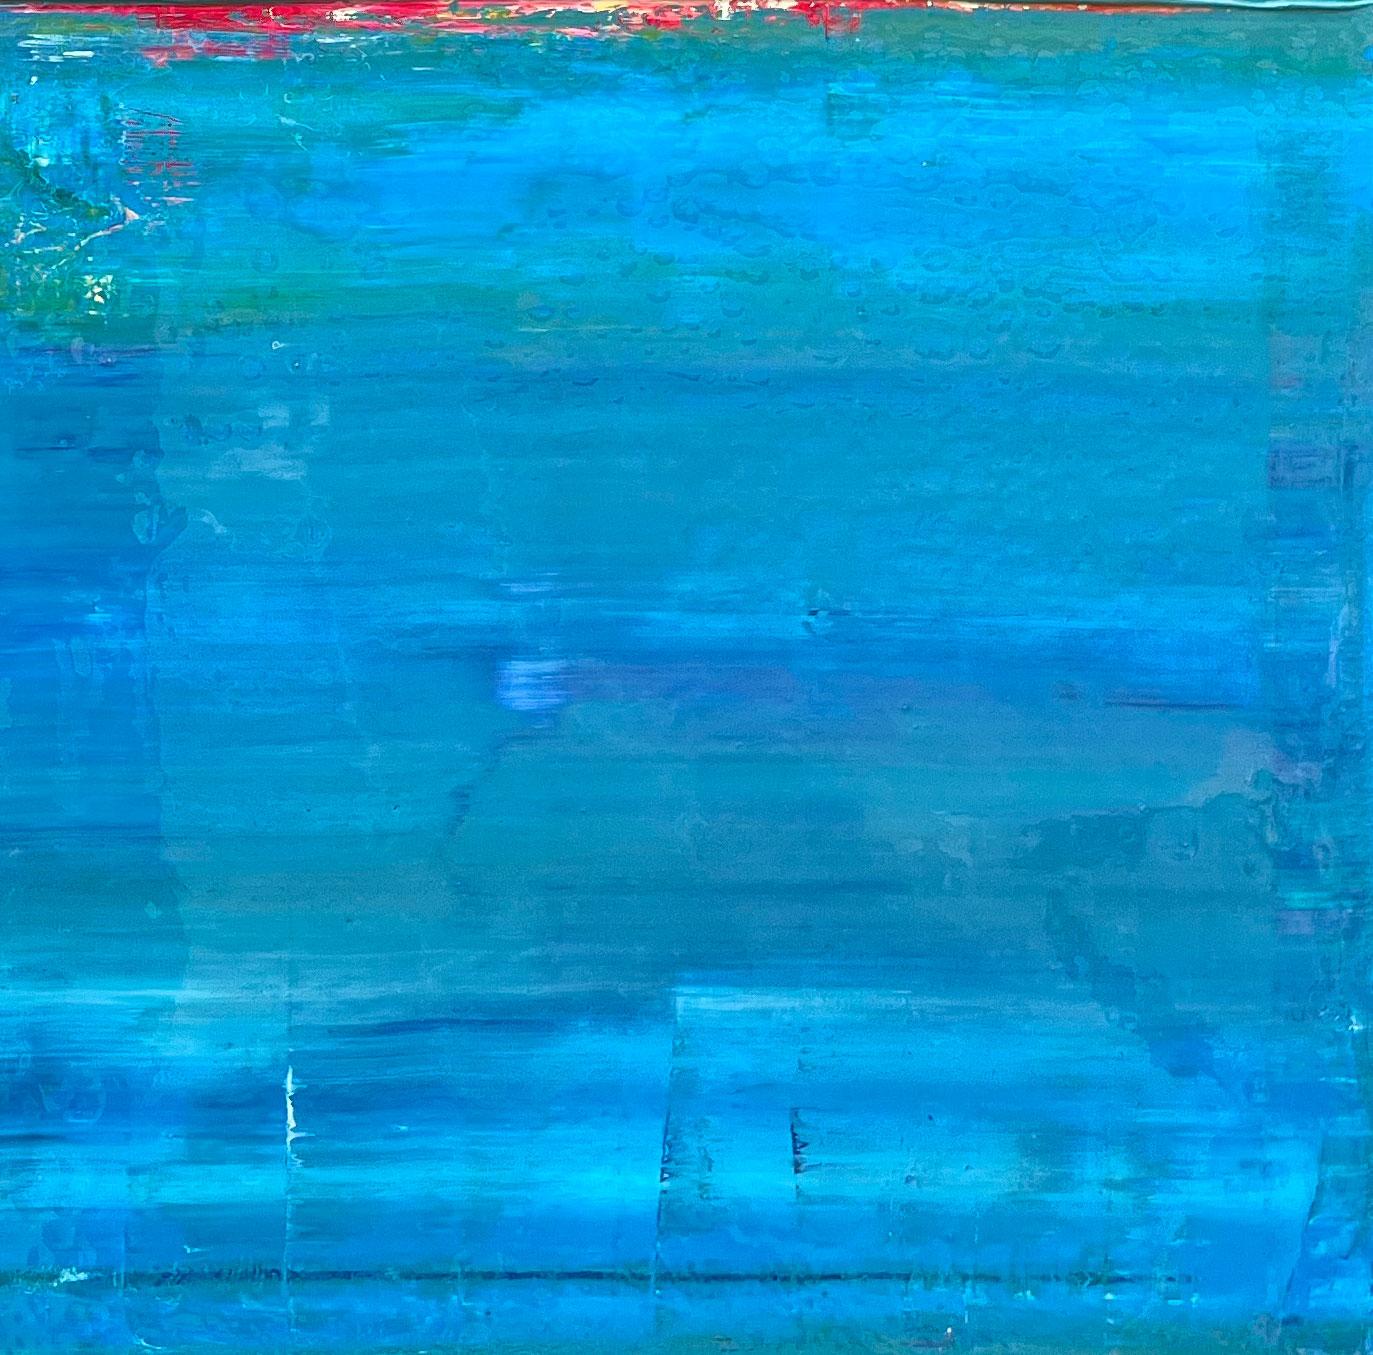 Climate Change - Malè, The Maldives - Blue Abstract Painting by Antonio Franchi